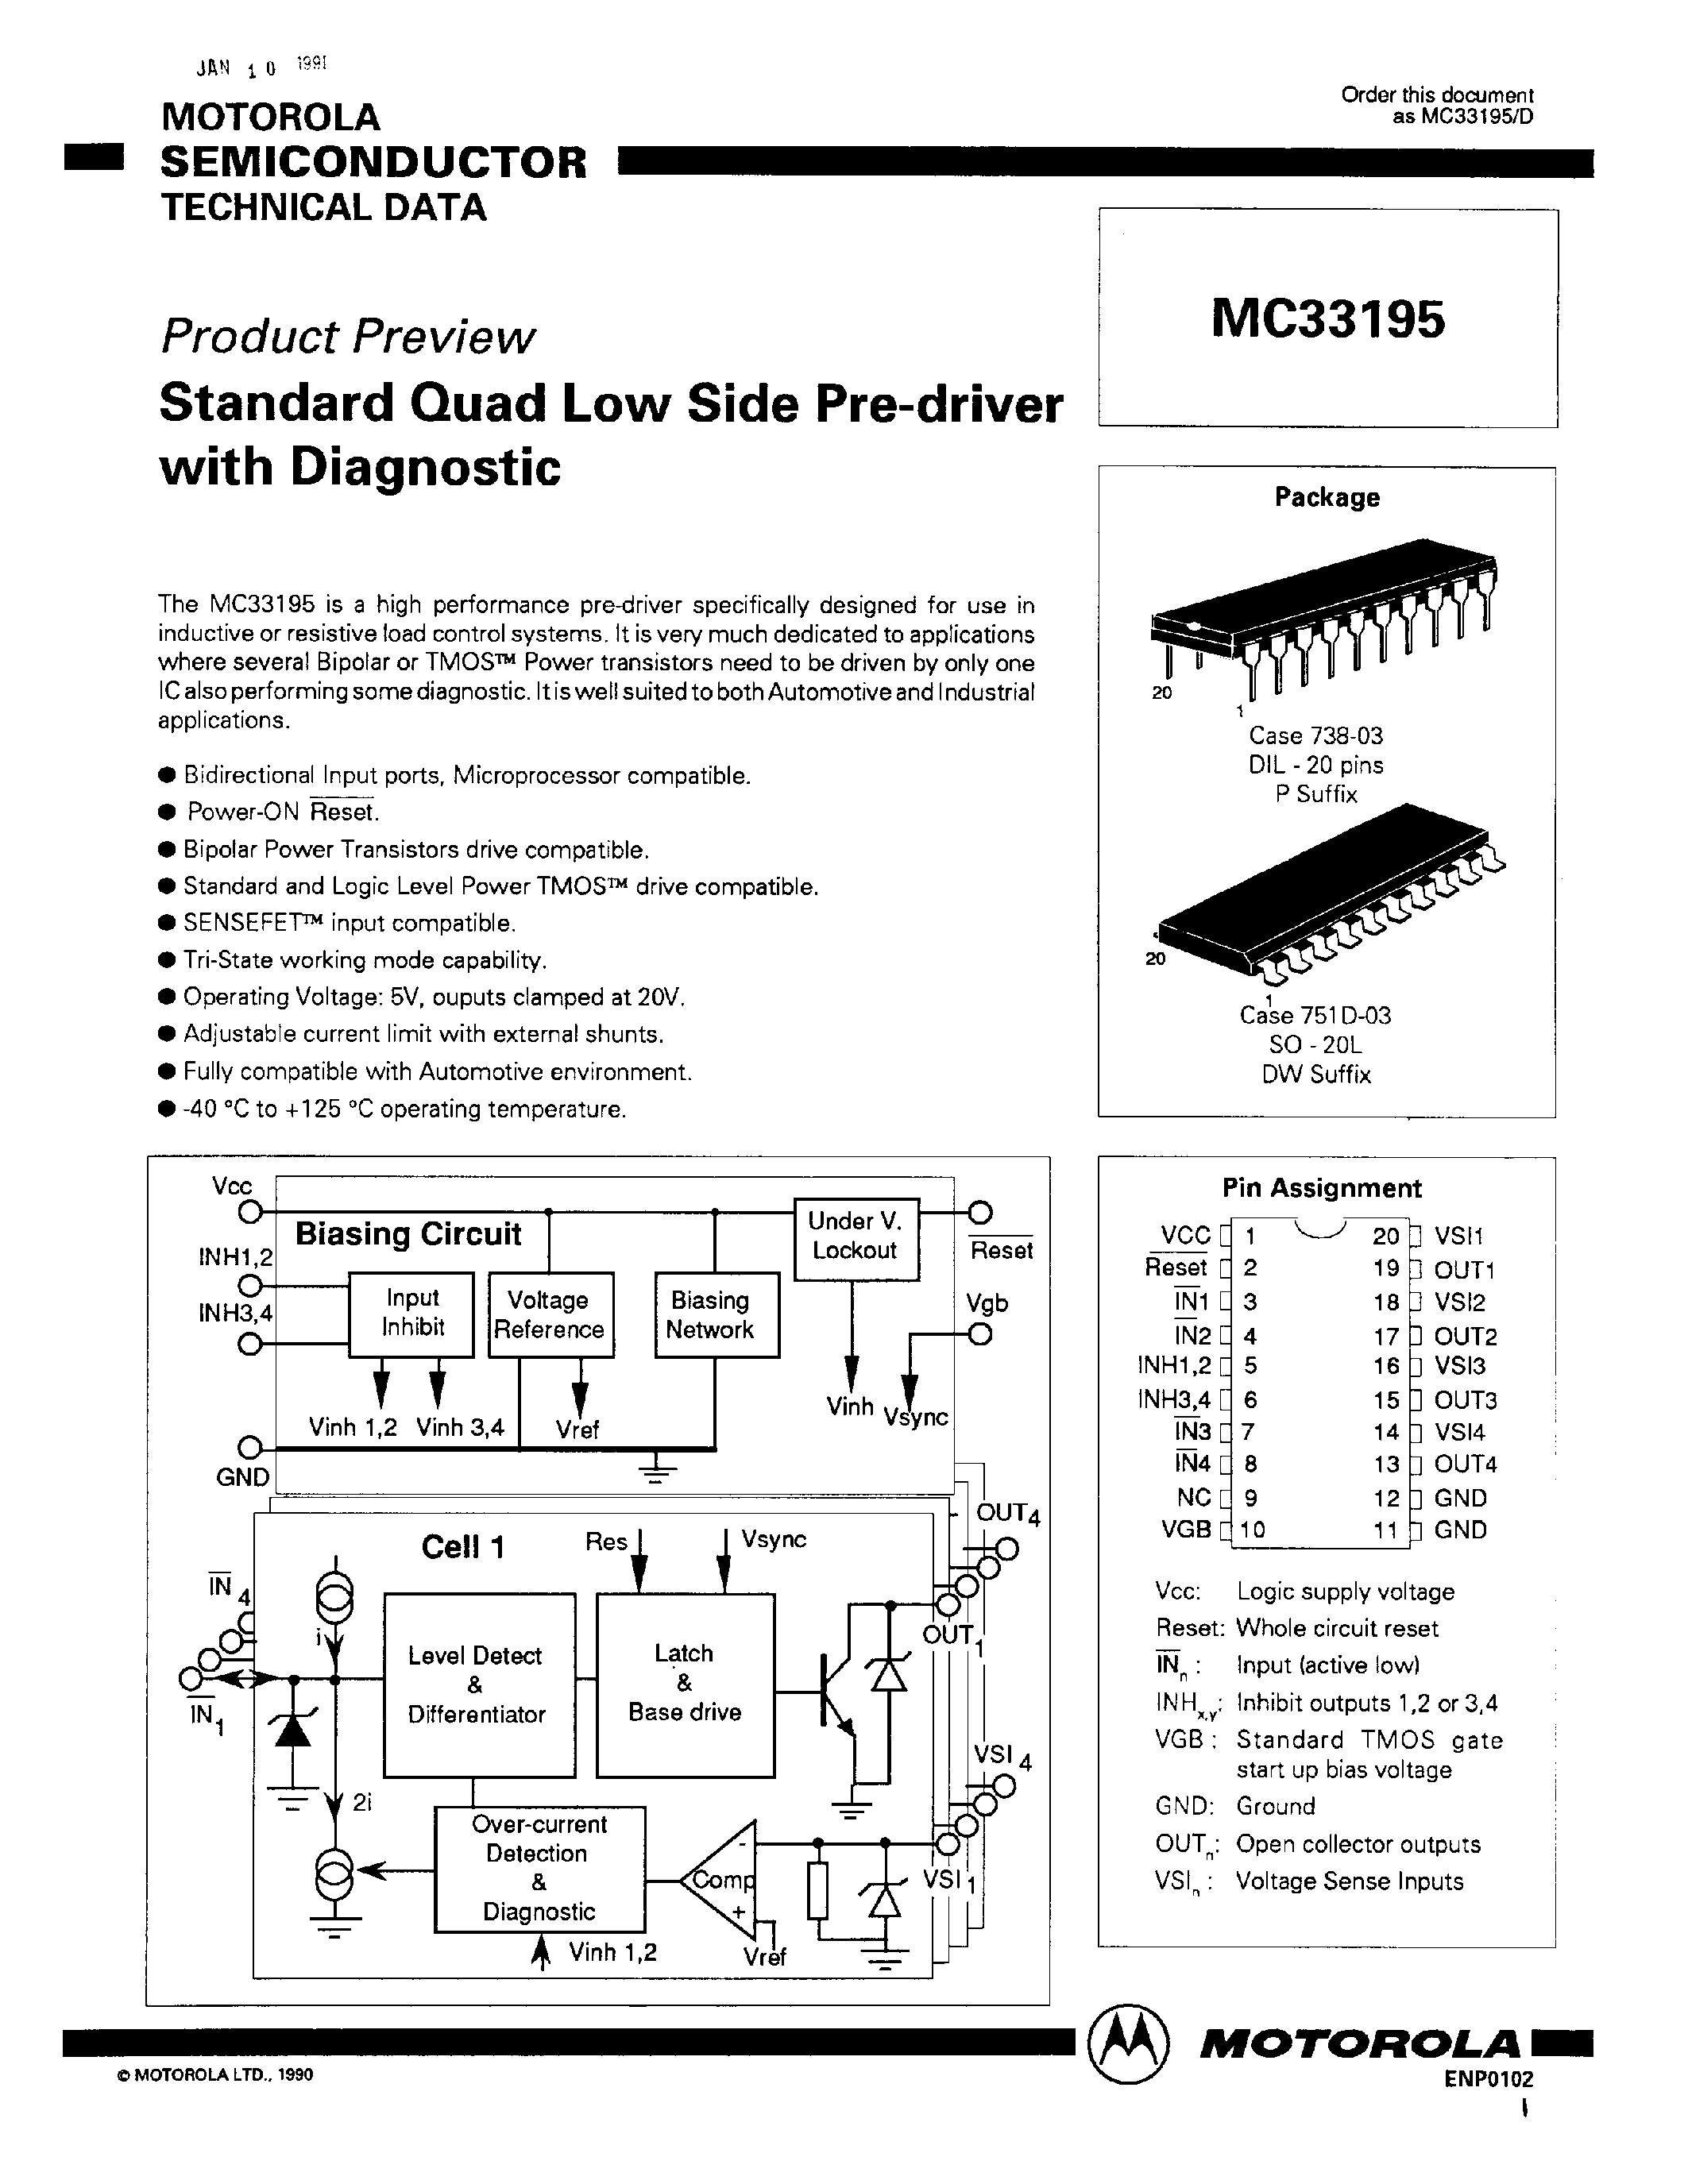 Datasheet MC33195 - Standard Quad Low Side Pre-driver with Diagnostic page 1